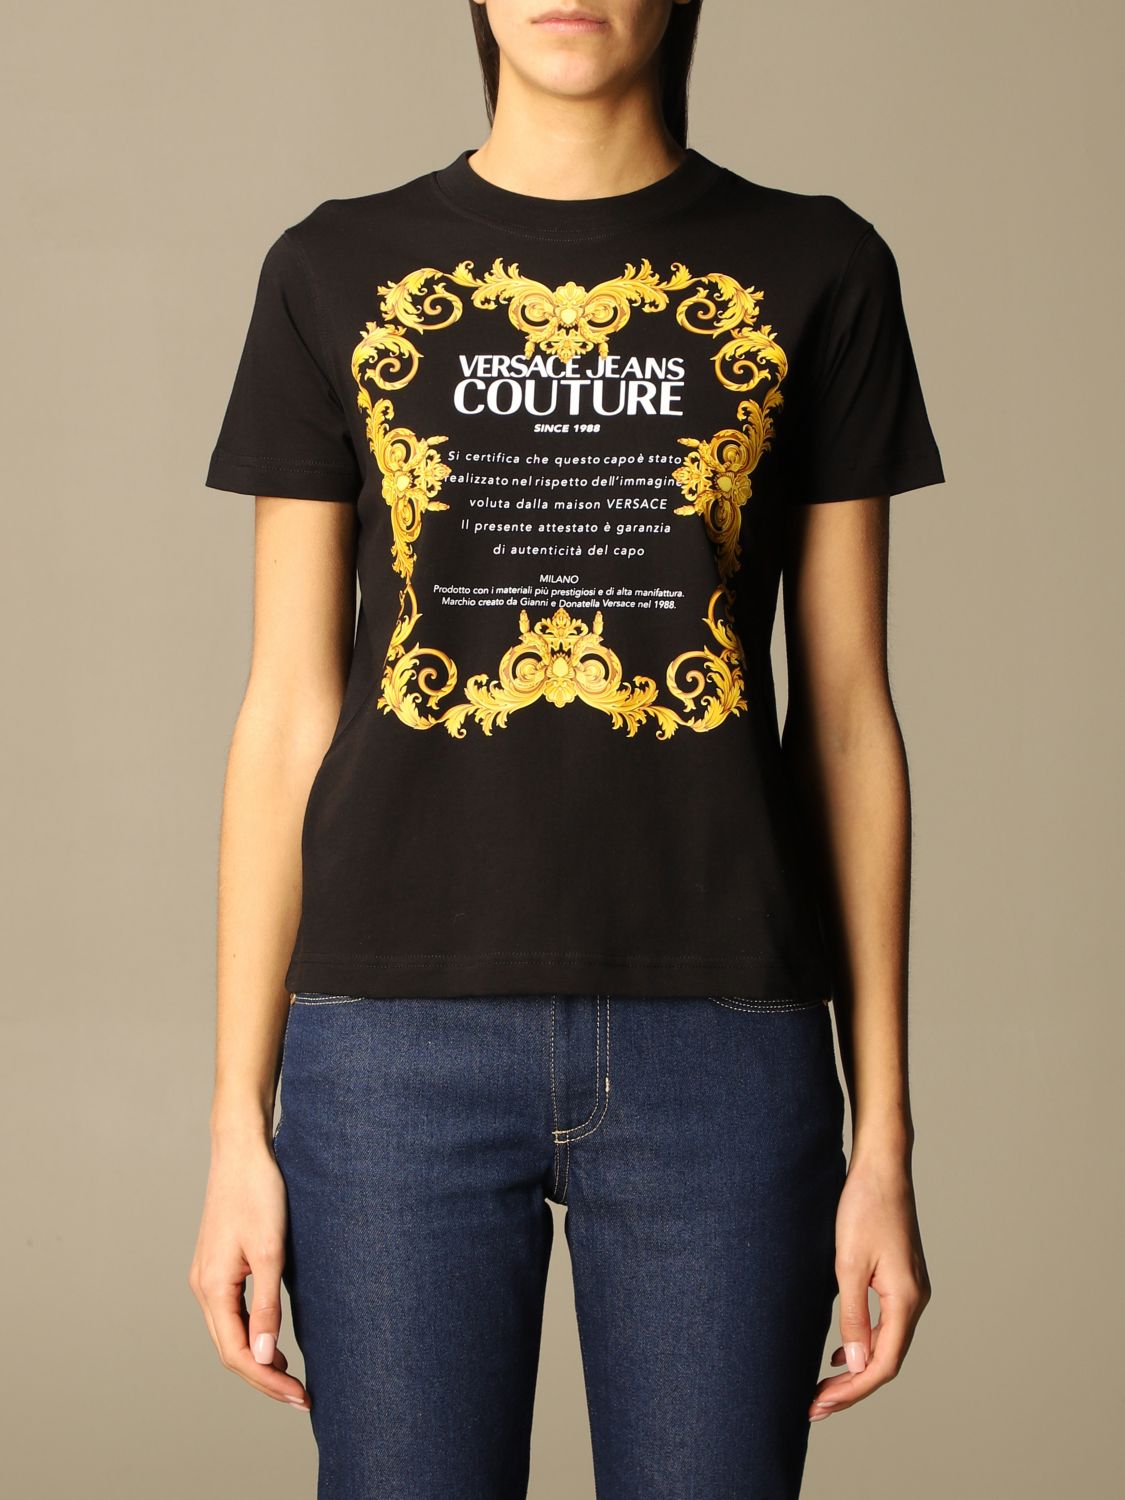 Versace Jeans Couture T Shirt With Baroque Print T Shirt Versace Jeans Couture Women Black T Shirt Versace Jeans Couture B2hwa7tj Giglio En